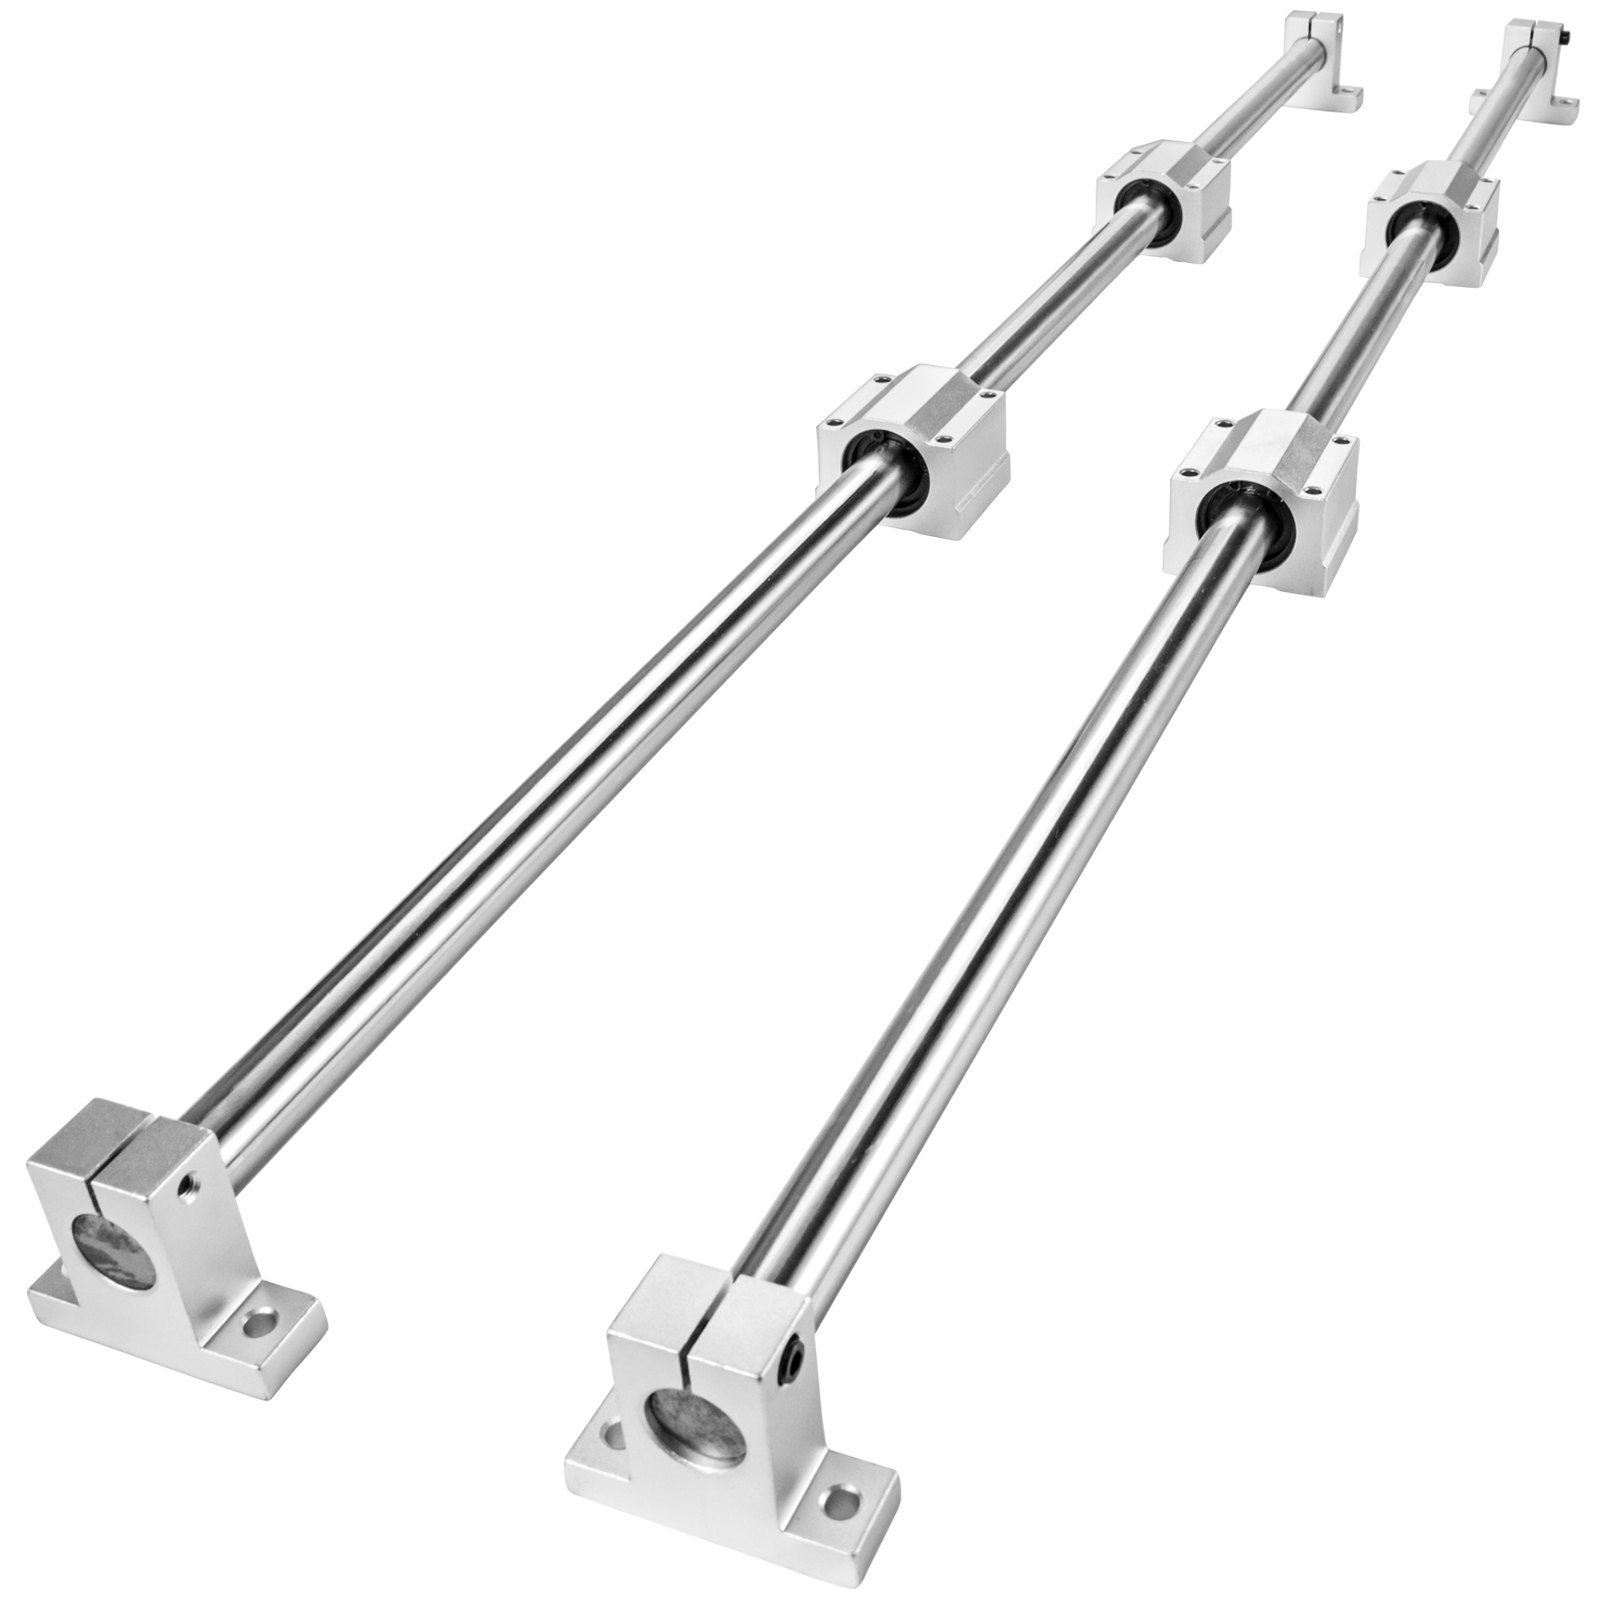 Optical Axis 20mm 600mm Linear Rail Shaft Rod With Bearing Block & Guide Support от Vevor Many GEOs